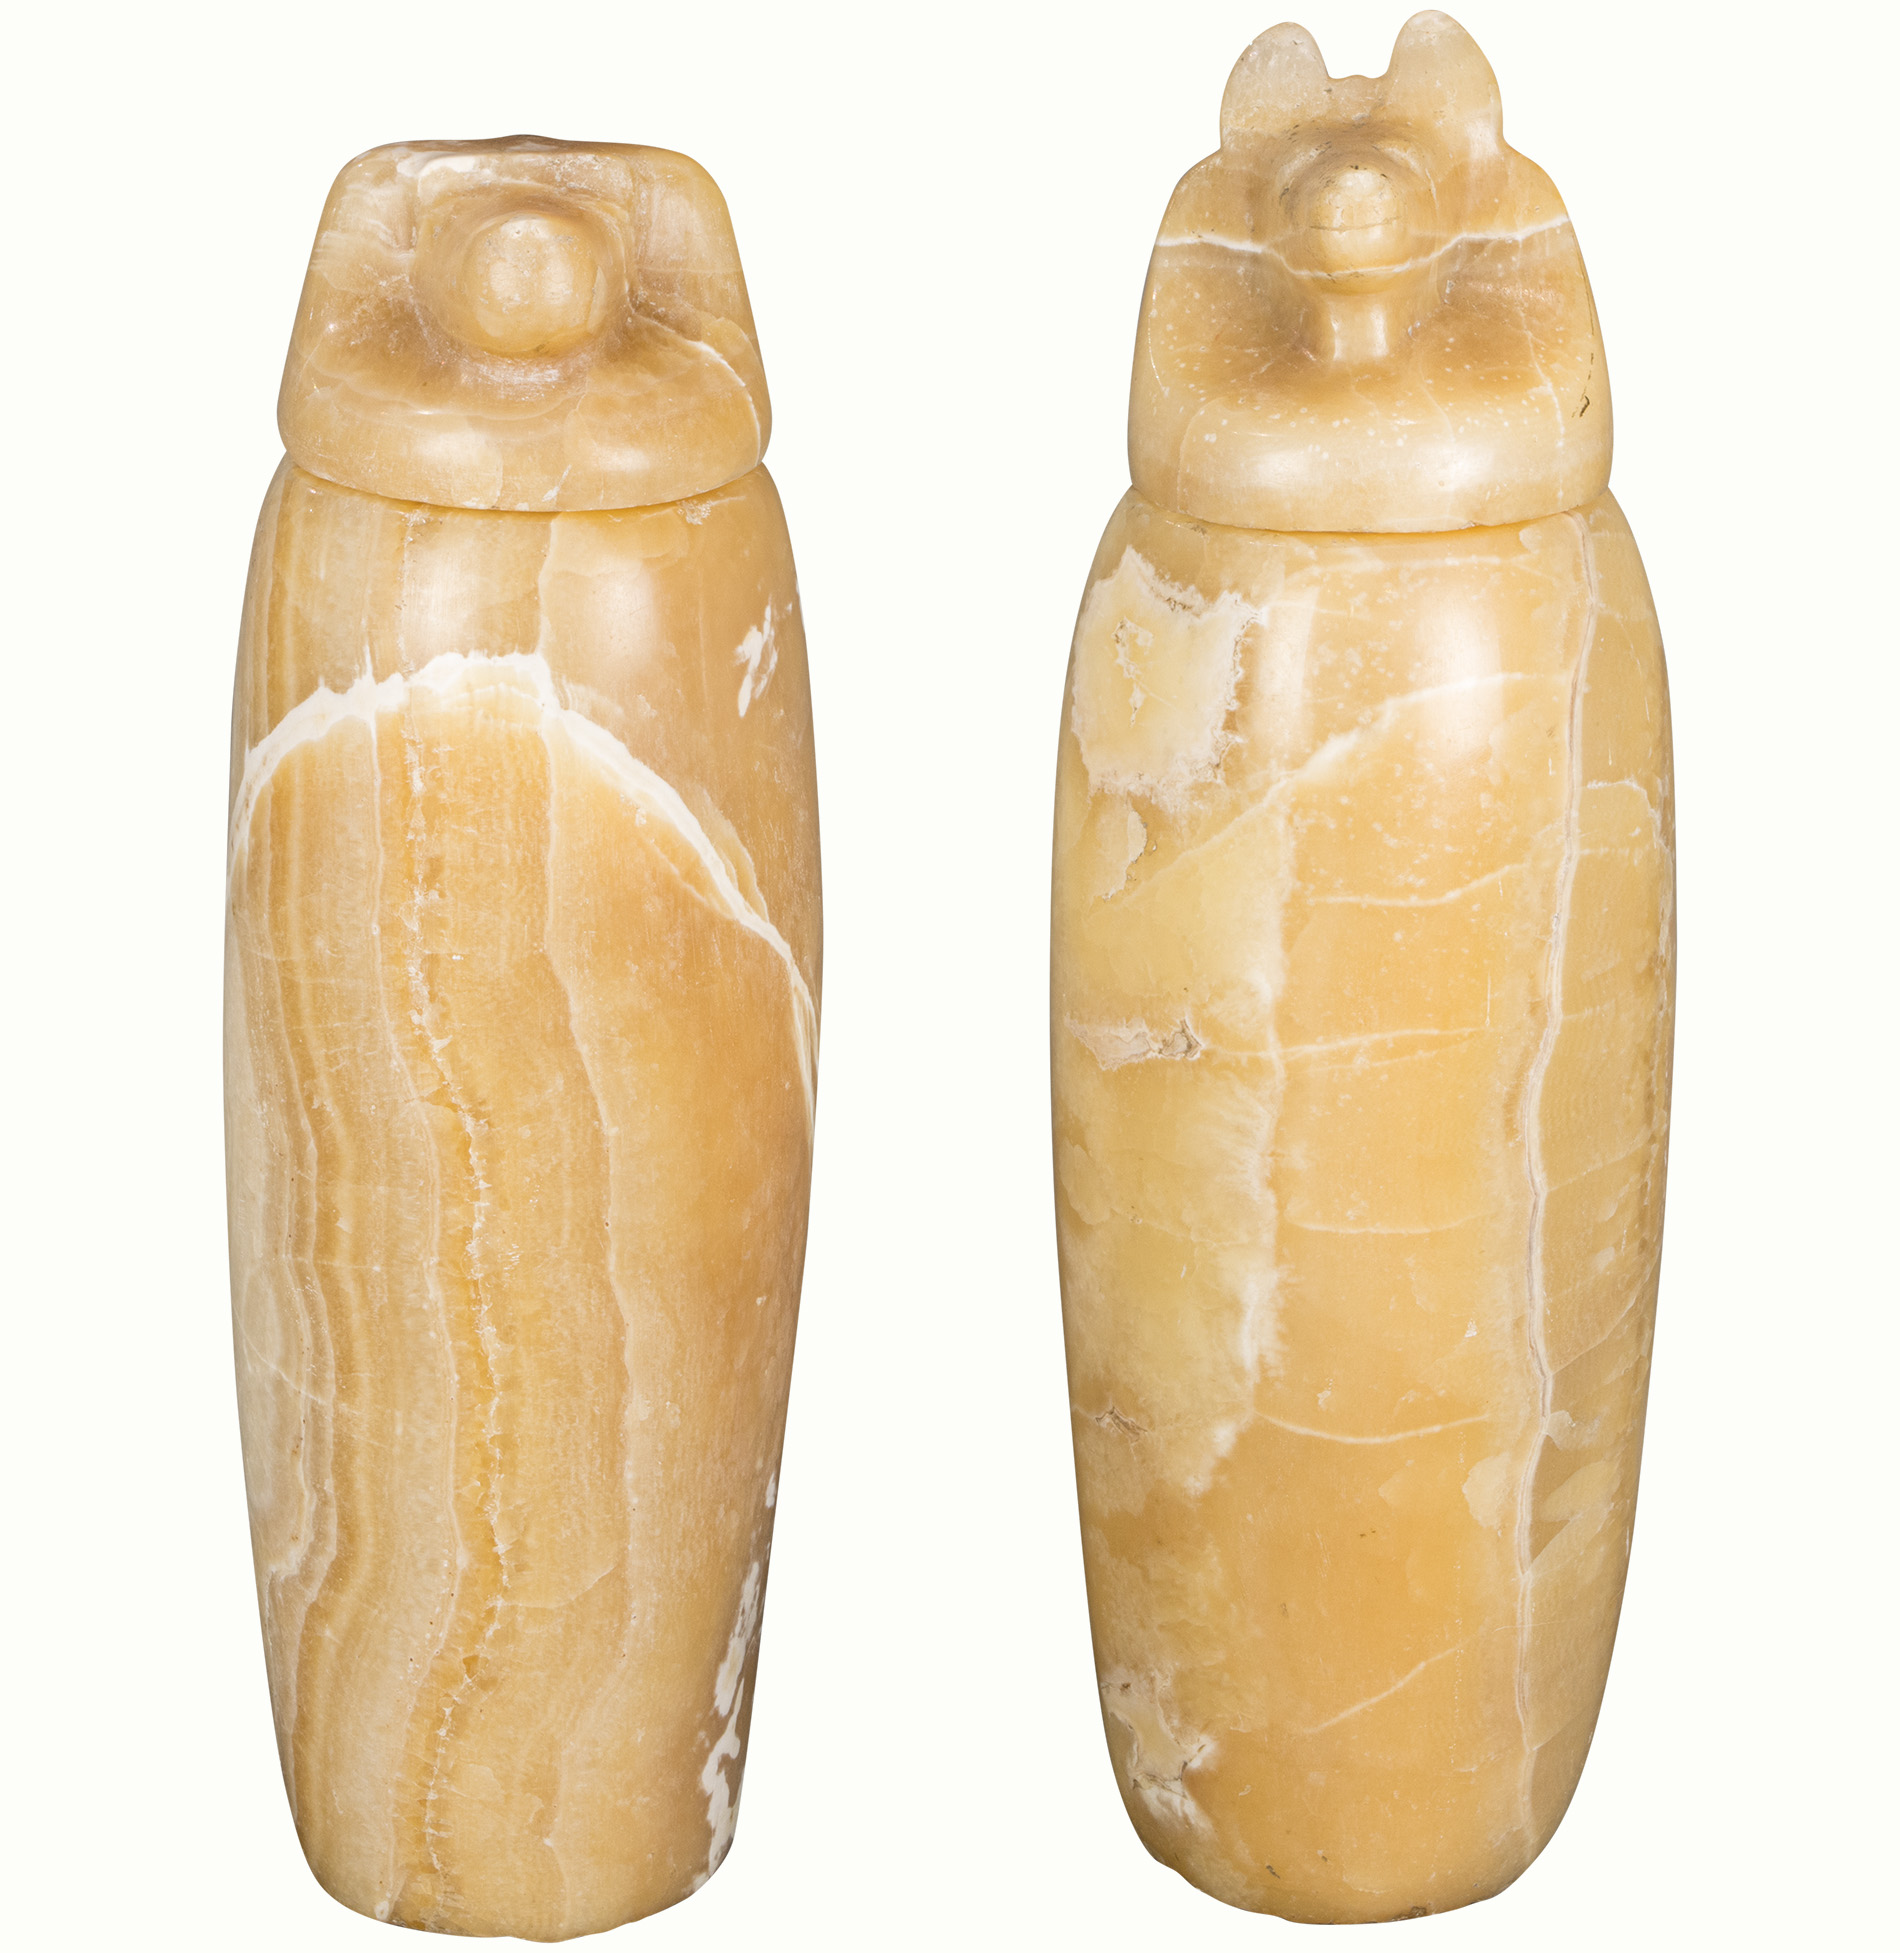 A pair of Egyptian Alabaster Canopic jars. Provenance: General Sir Maxwell of the British Army.